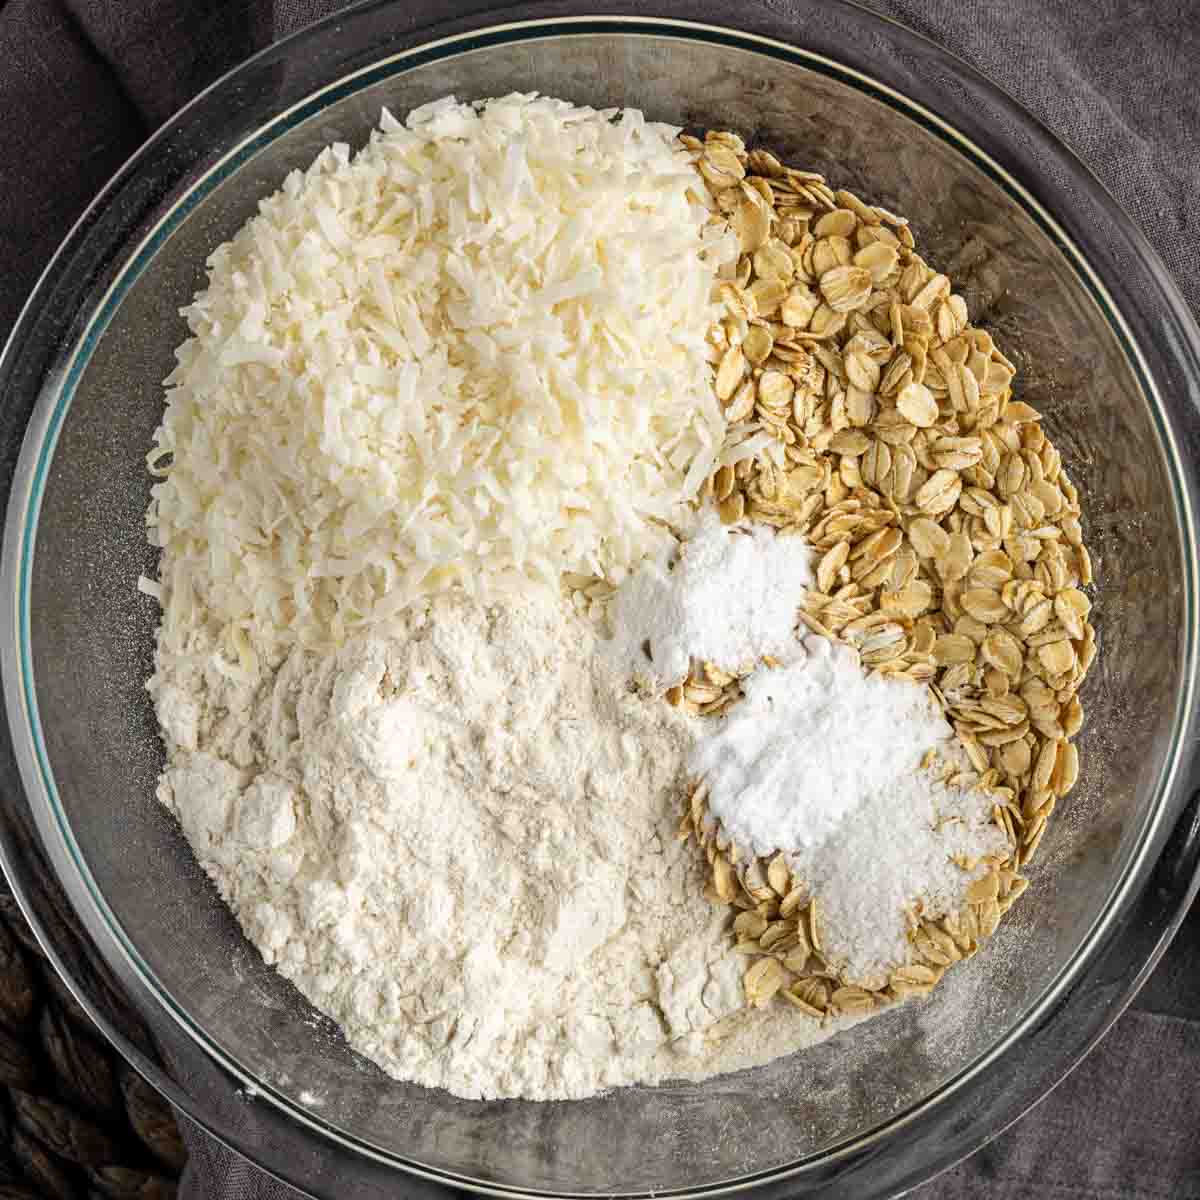 Oats, flour, sugar and butter in a glass bowl to make Crispy Coconut Cookies